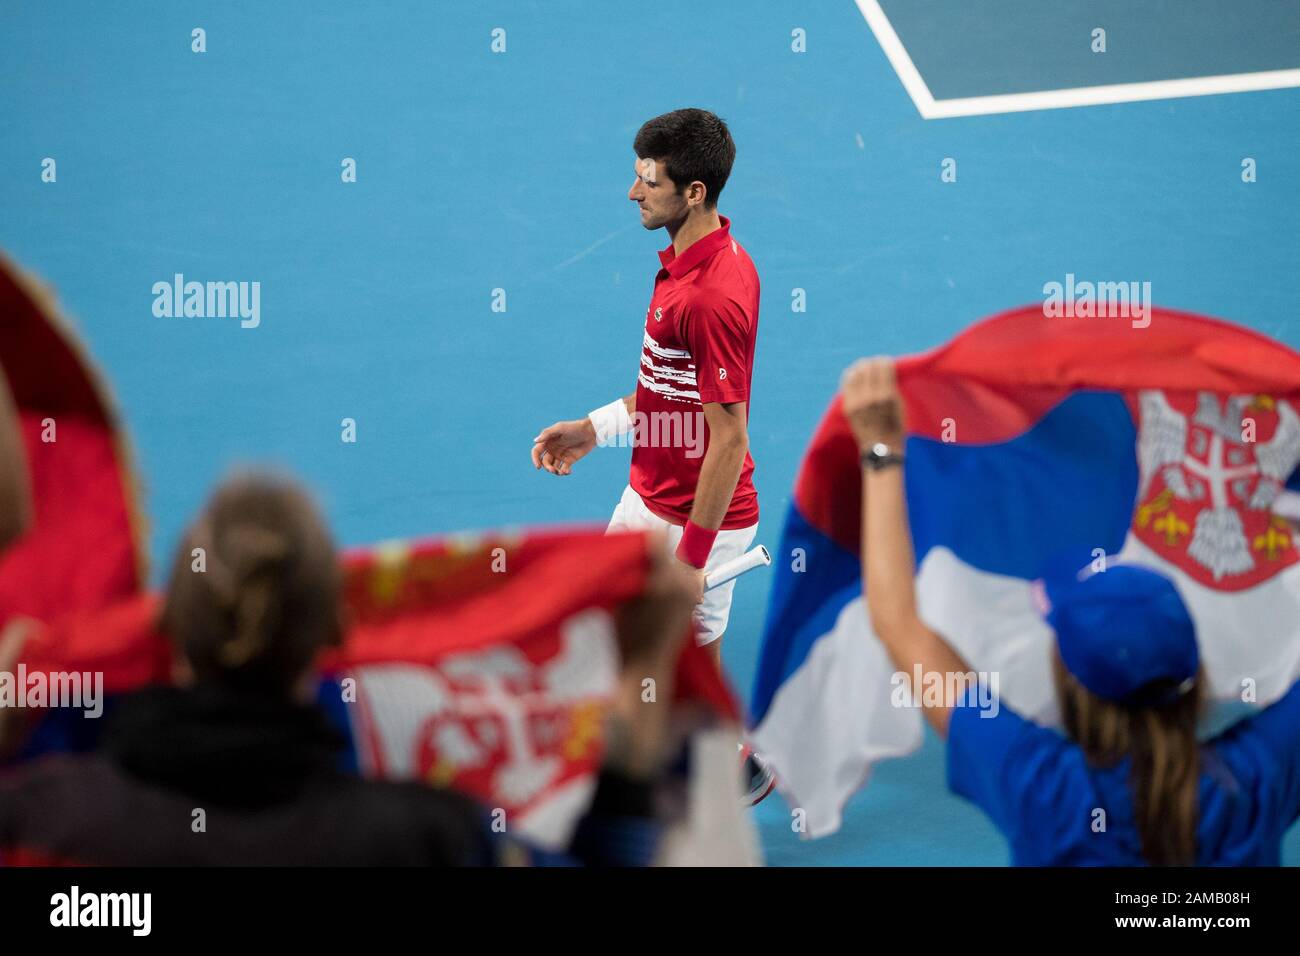 Serbia win the Cup 2-1 against Spain during the 2020 ATP Cup Final at the Ken Rosewall Arena, Sydney, Australia on 12 January 2020. Photo by Peter Dovgan. Stock Photo